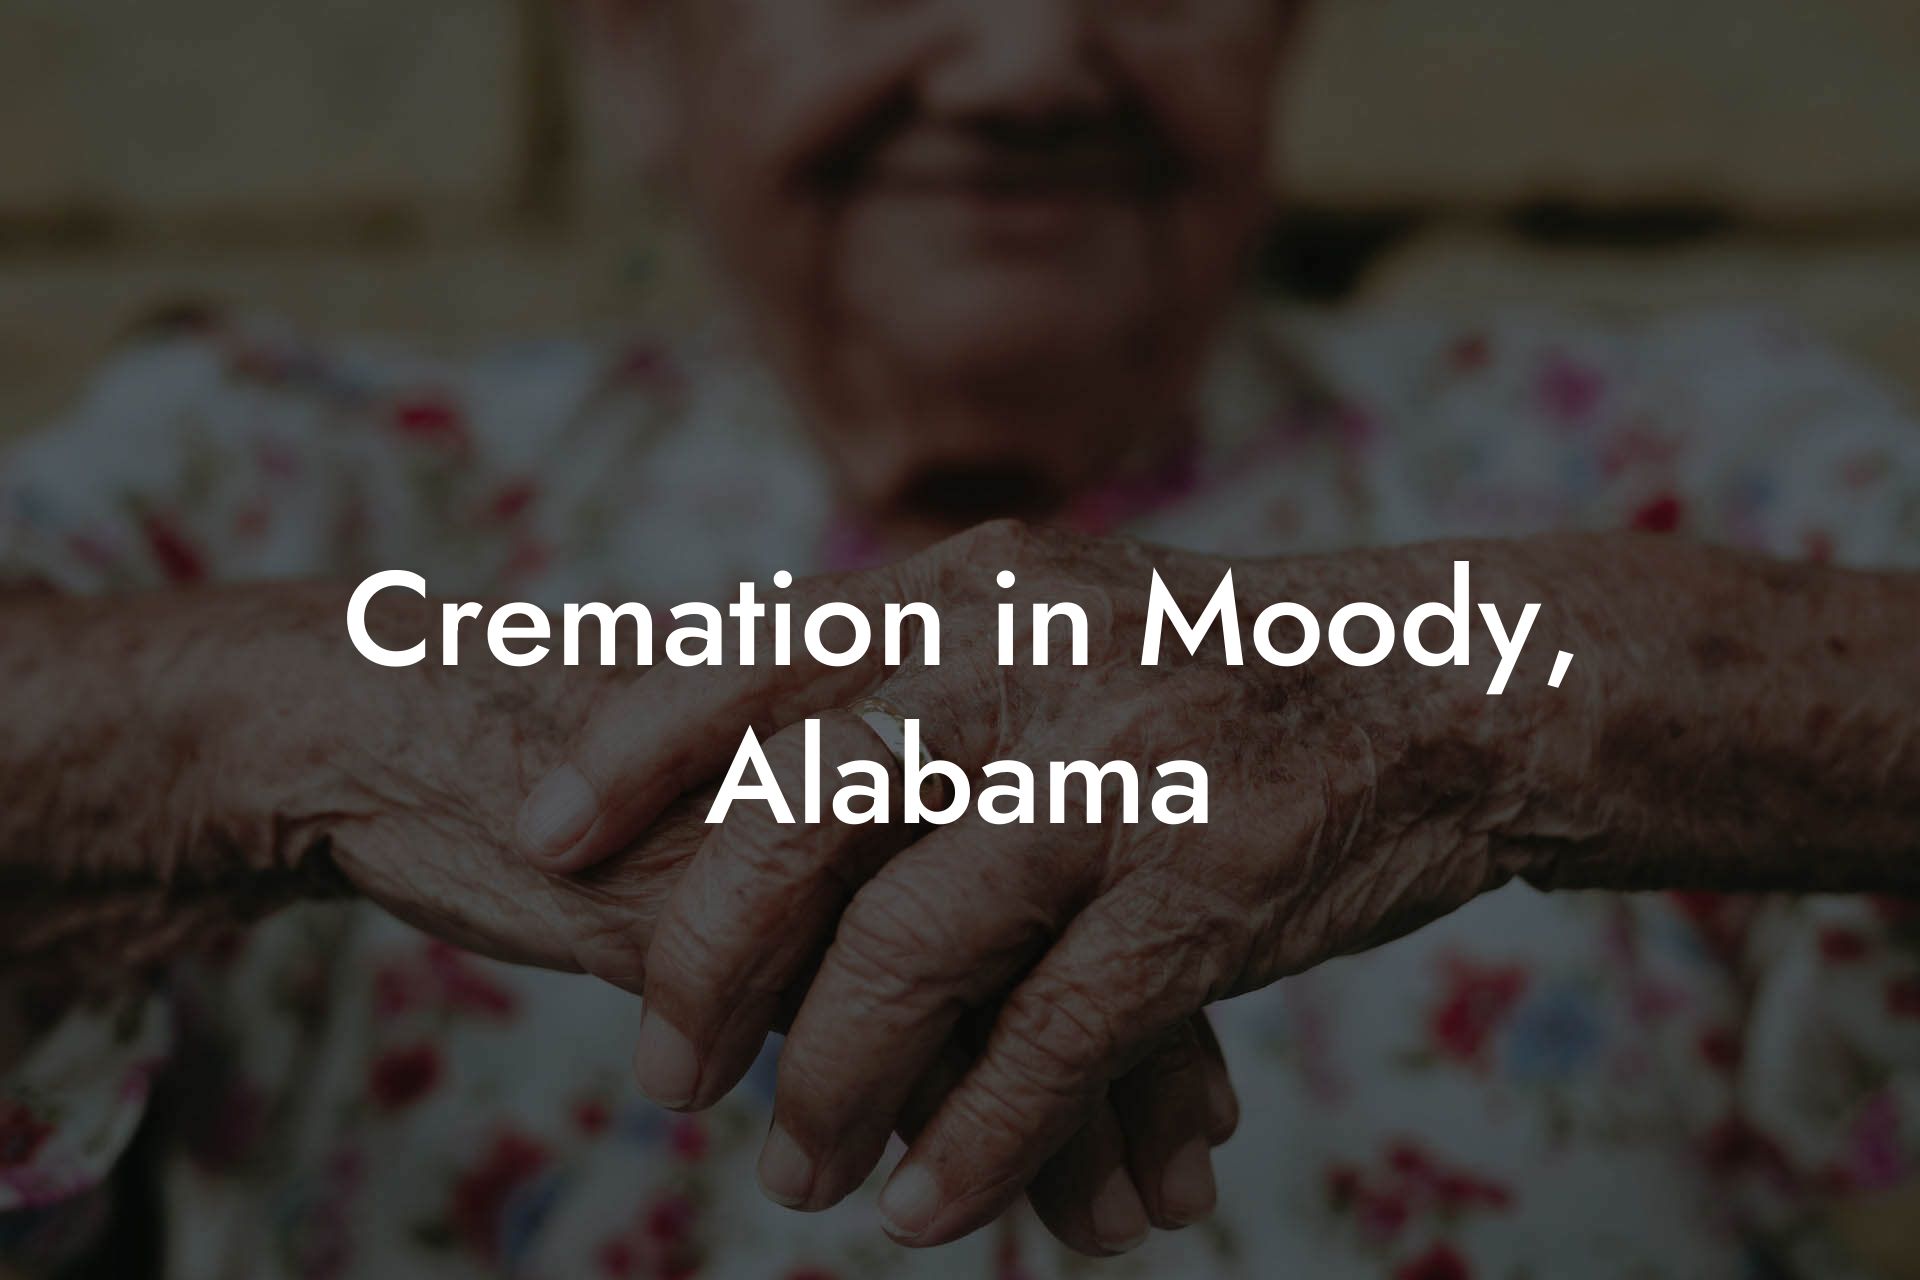 Cremation in Moody, Alabama